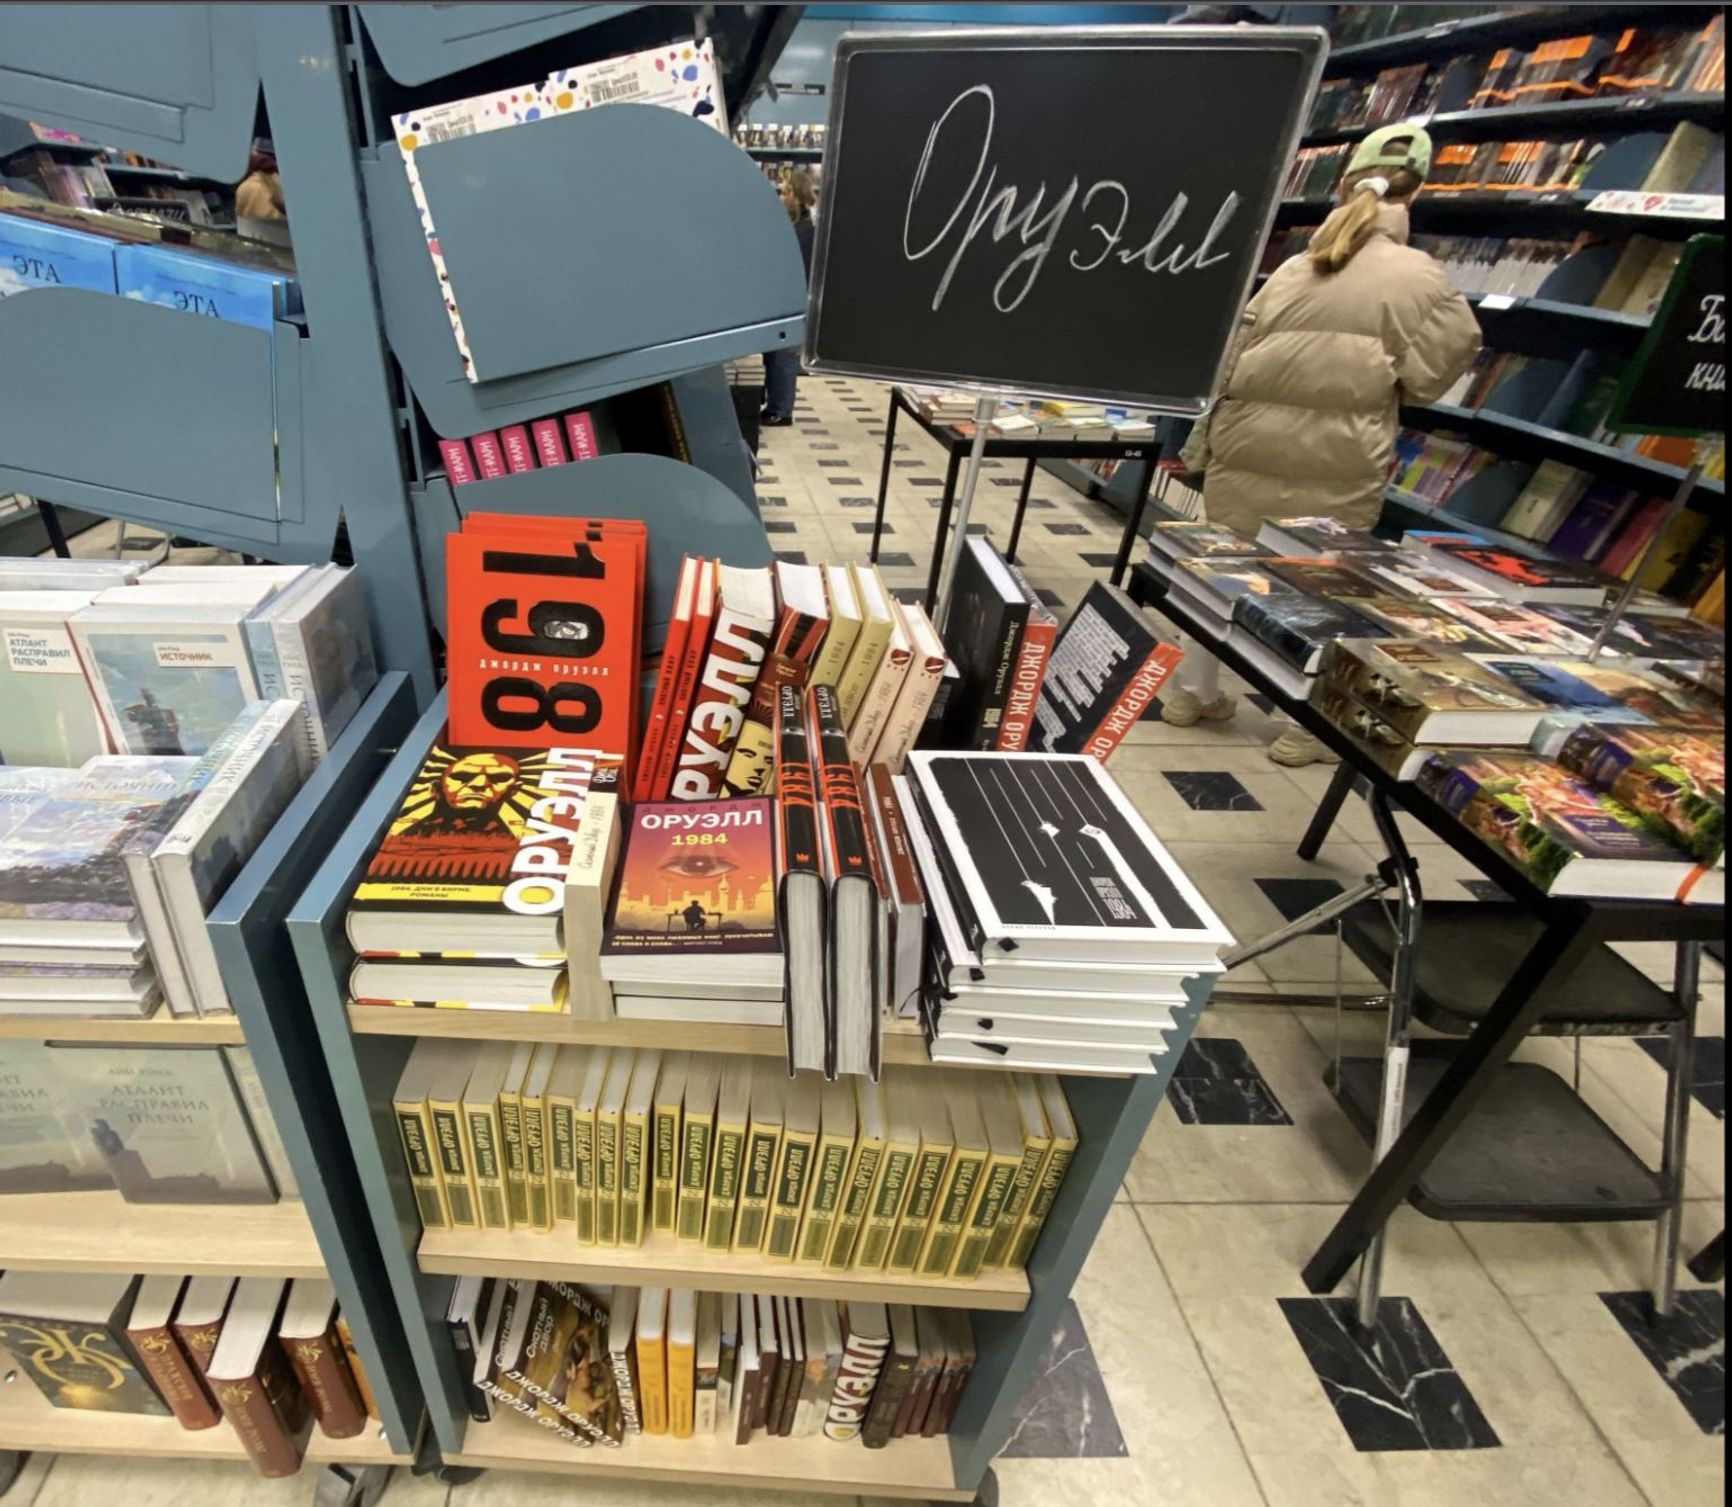 An Orwell books display at Moscow House of Books